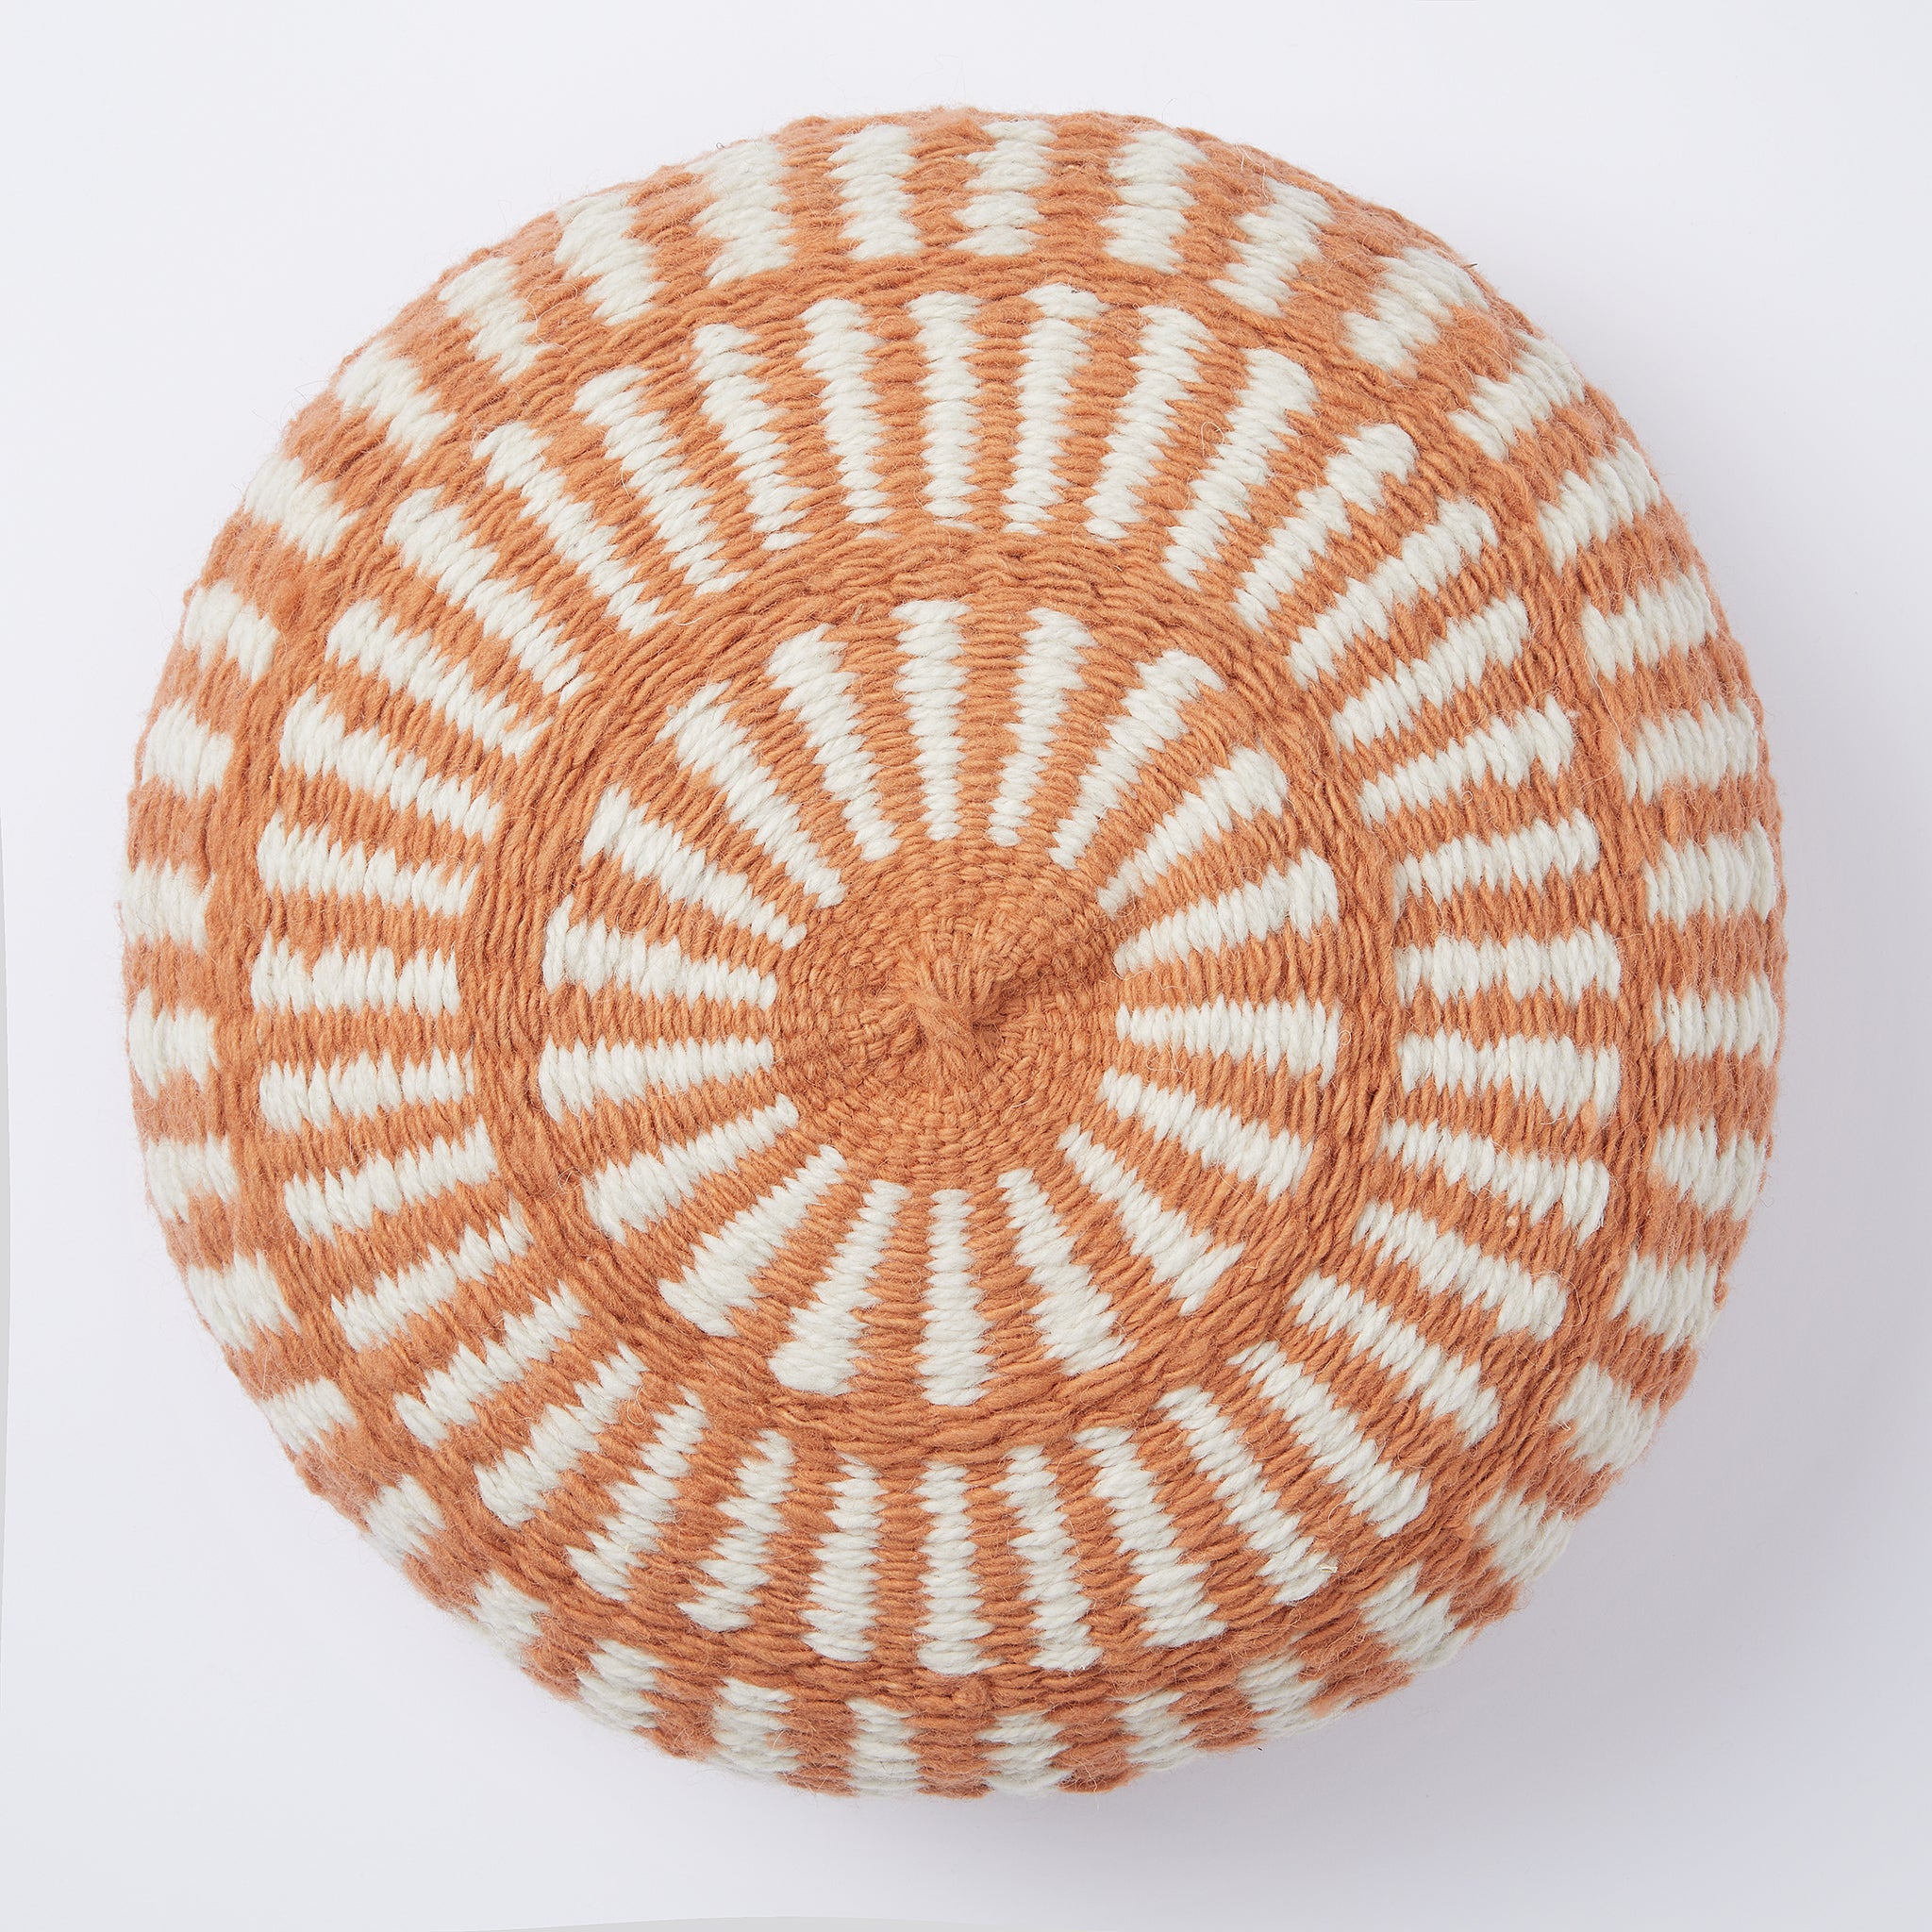 Salta Large cushion, natural white & burnt orange.  A great eye-catcher on your sofa or in your favourite armchair. Individual, lovingly handmade cushion made from 100% Argentinian sheep's wool with a traditional pattern.   This cushion comes ready styled with a vegan cushion filling.